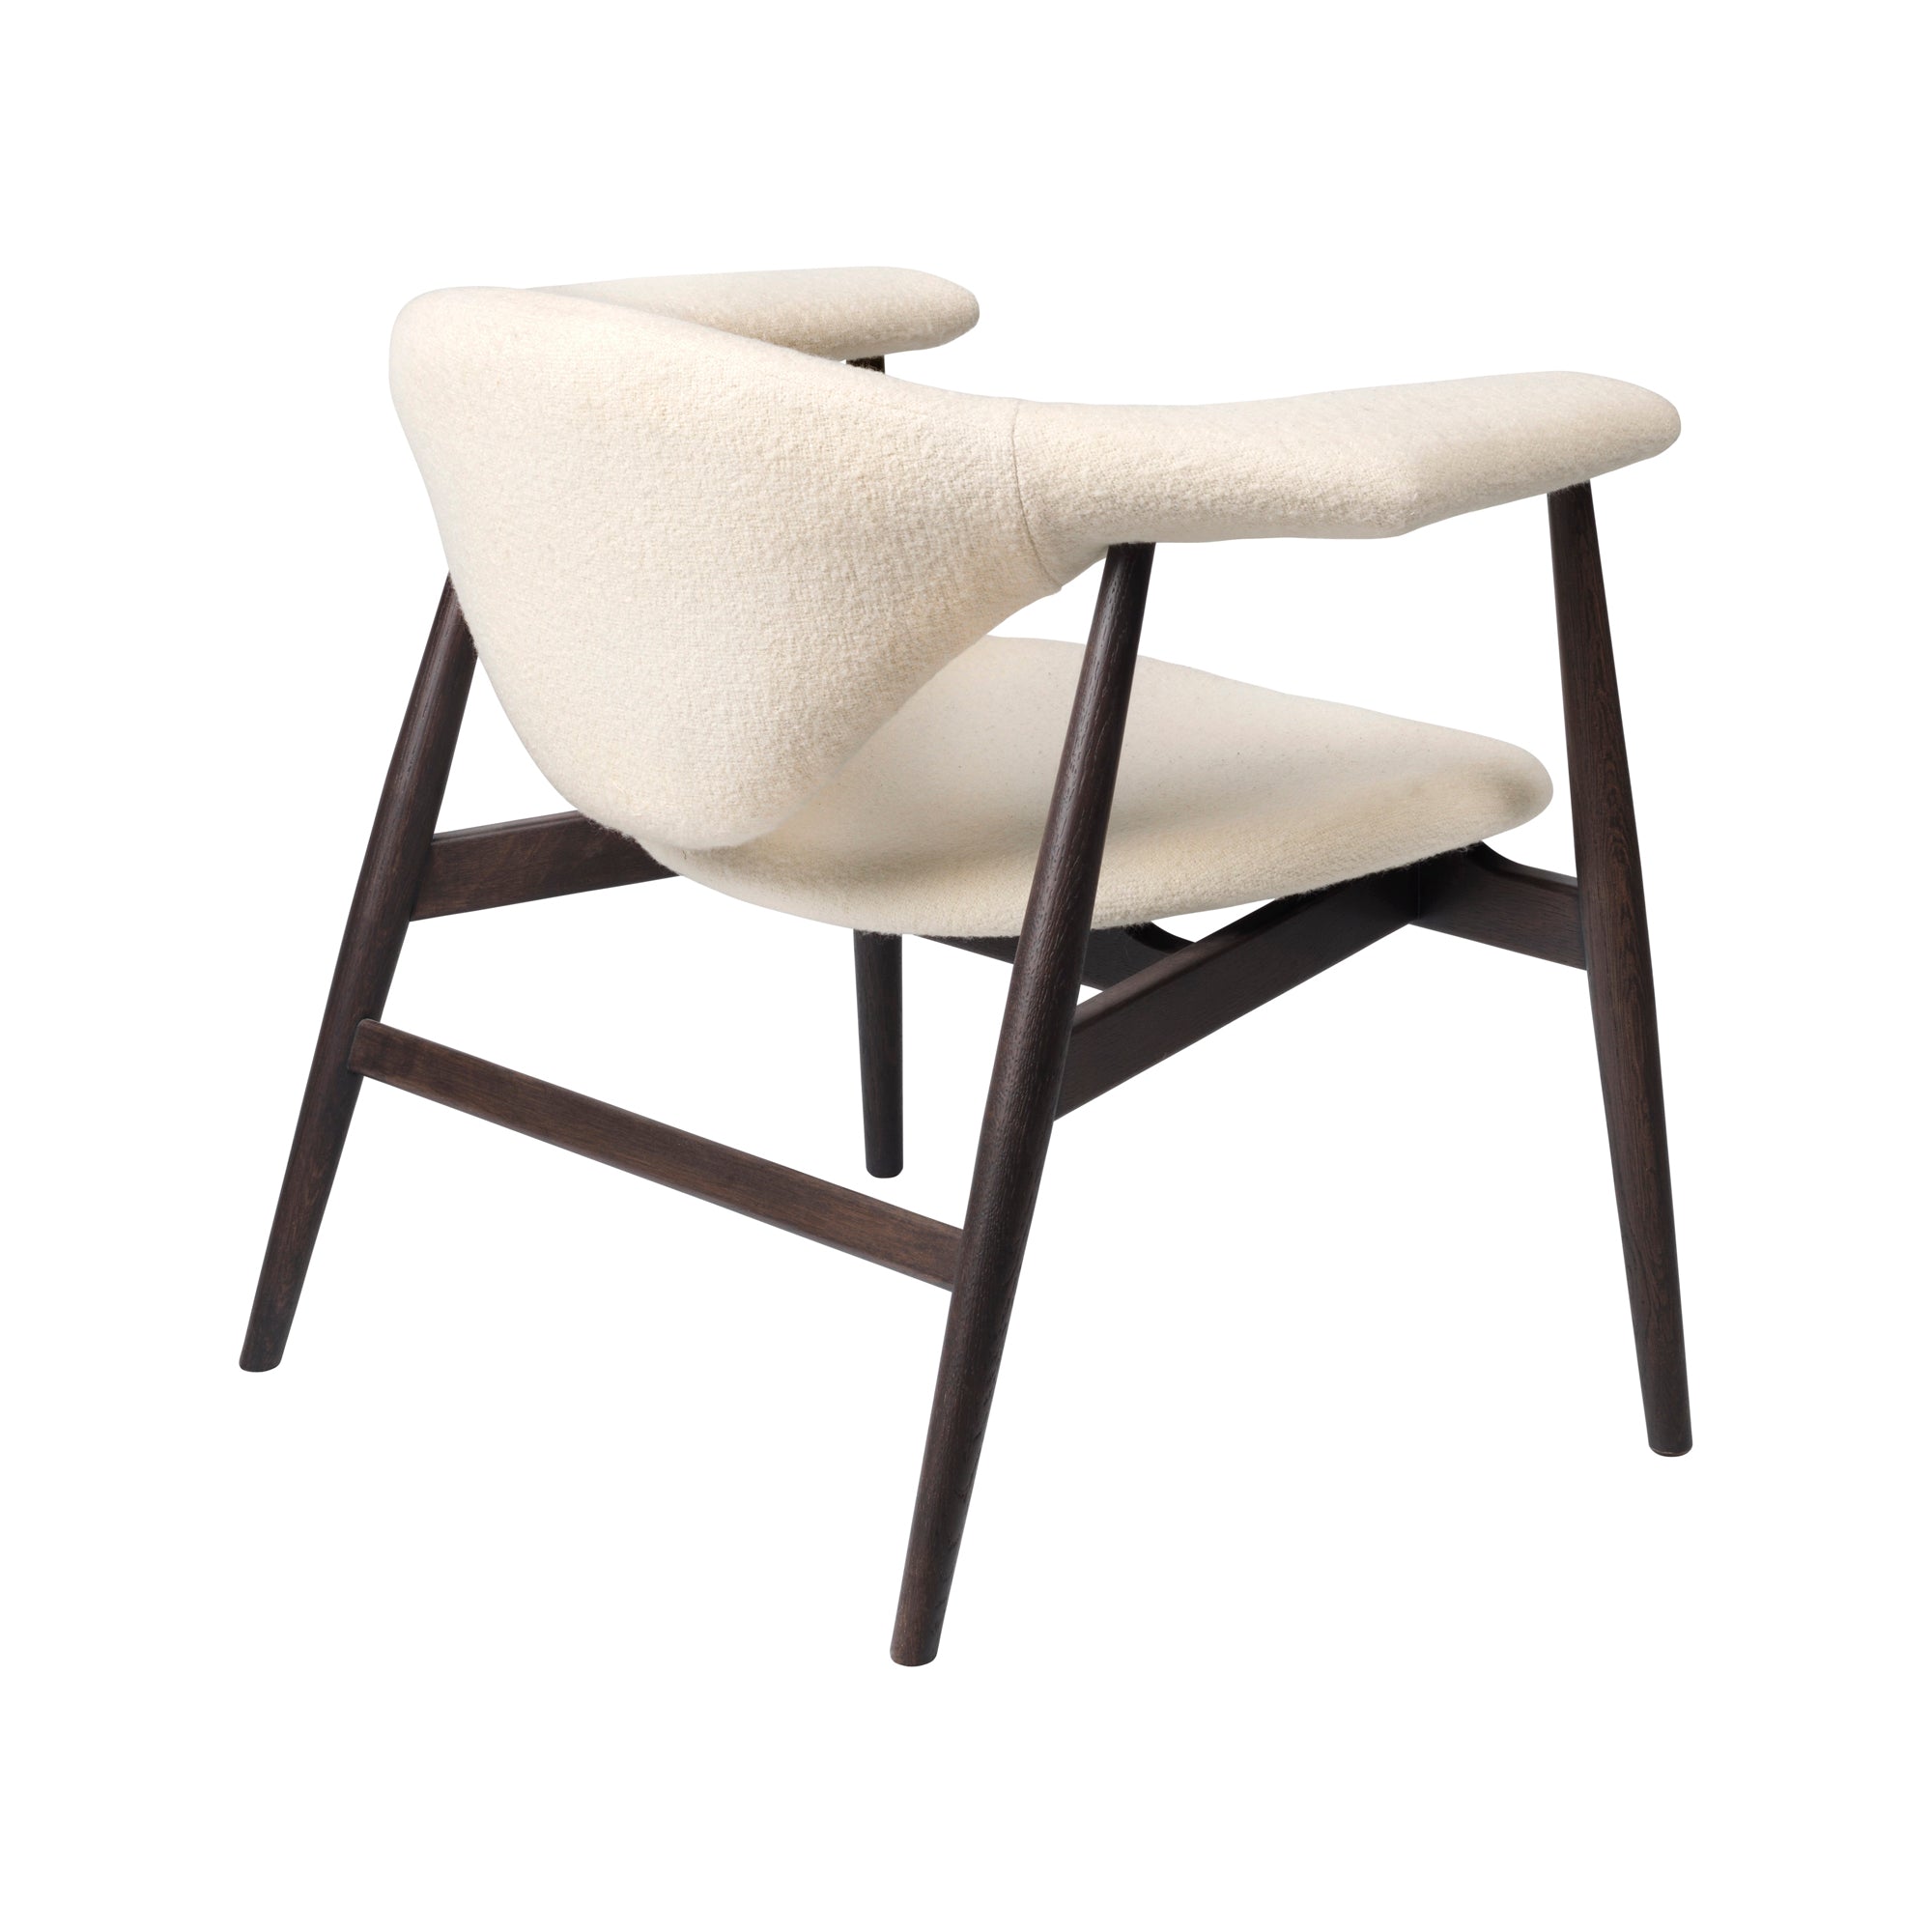 Masculo Lounge Chair - Fully Upholstered